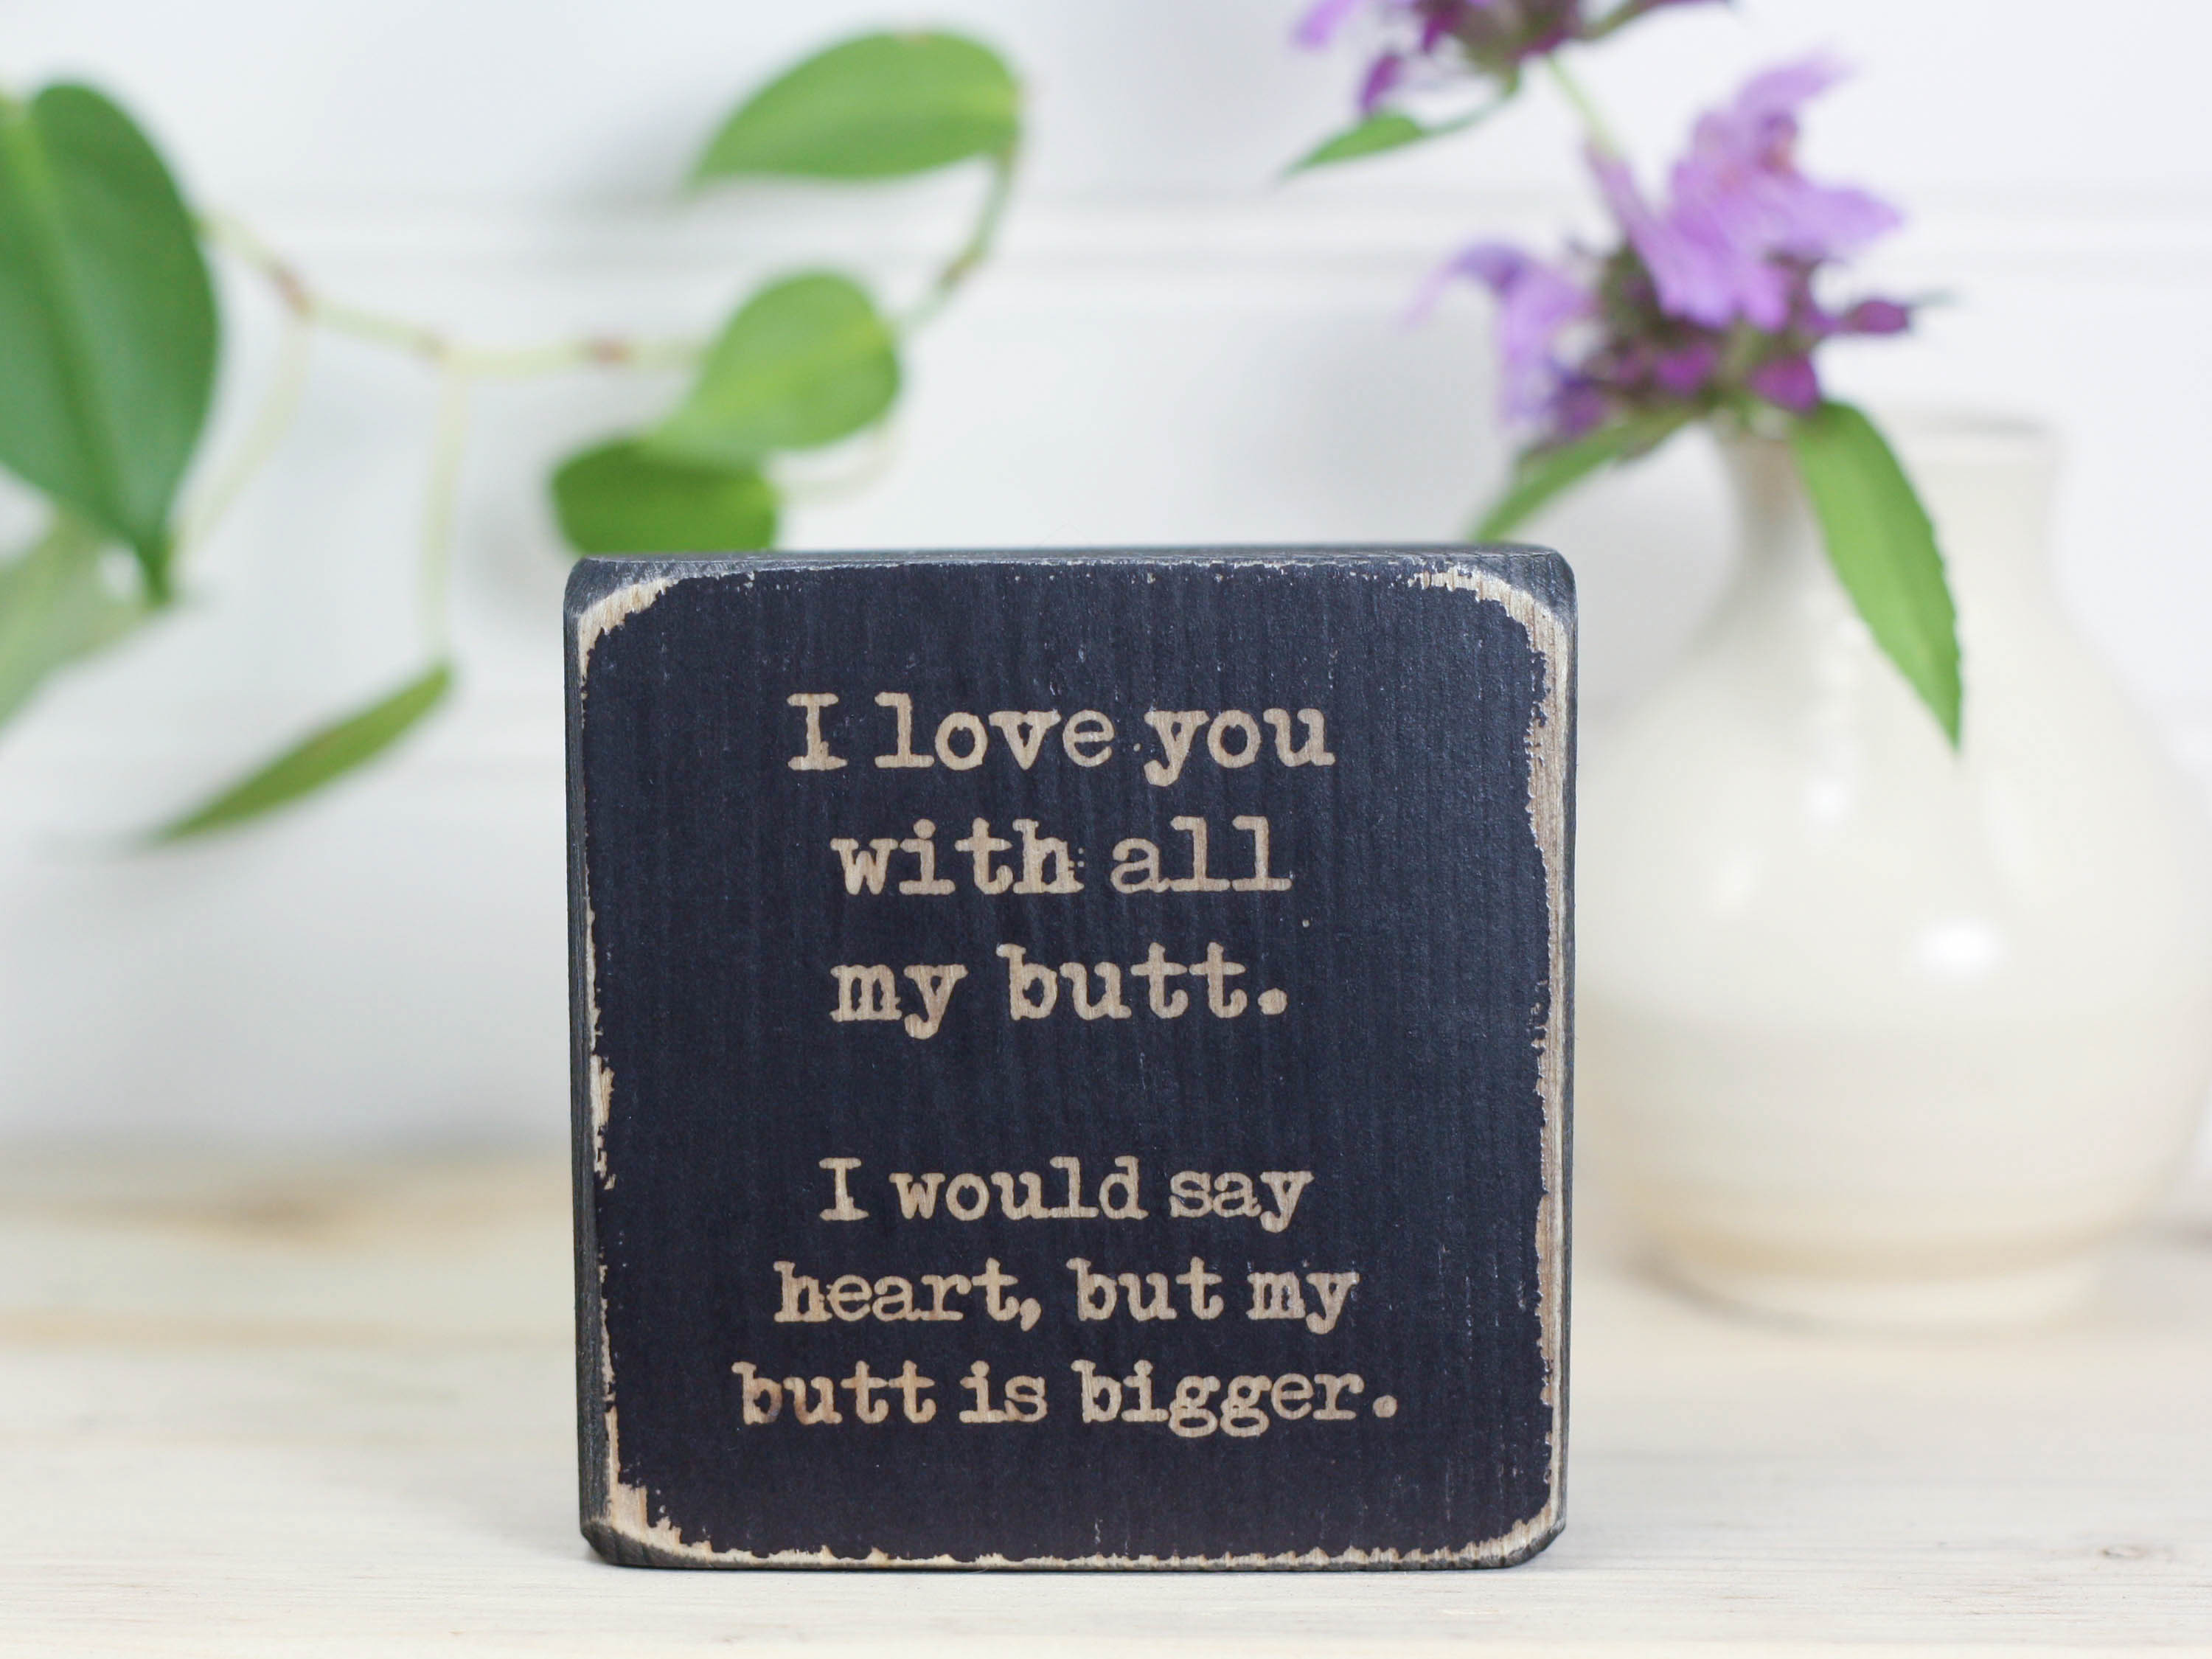 Small freestanding decor in distressed black with the saying "I love you with all my butt. I would say heart, but my butt is bigger." Hilarious and romantic.